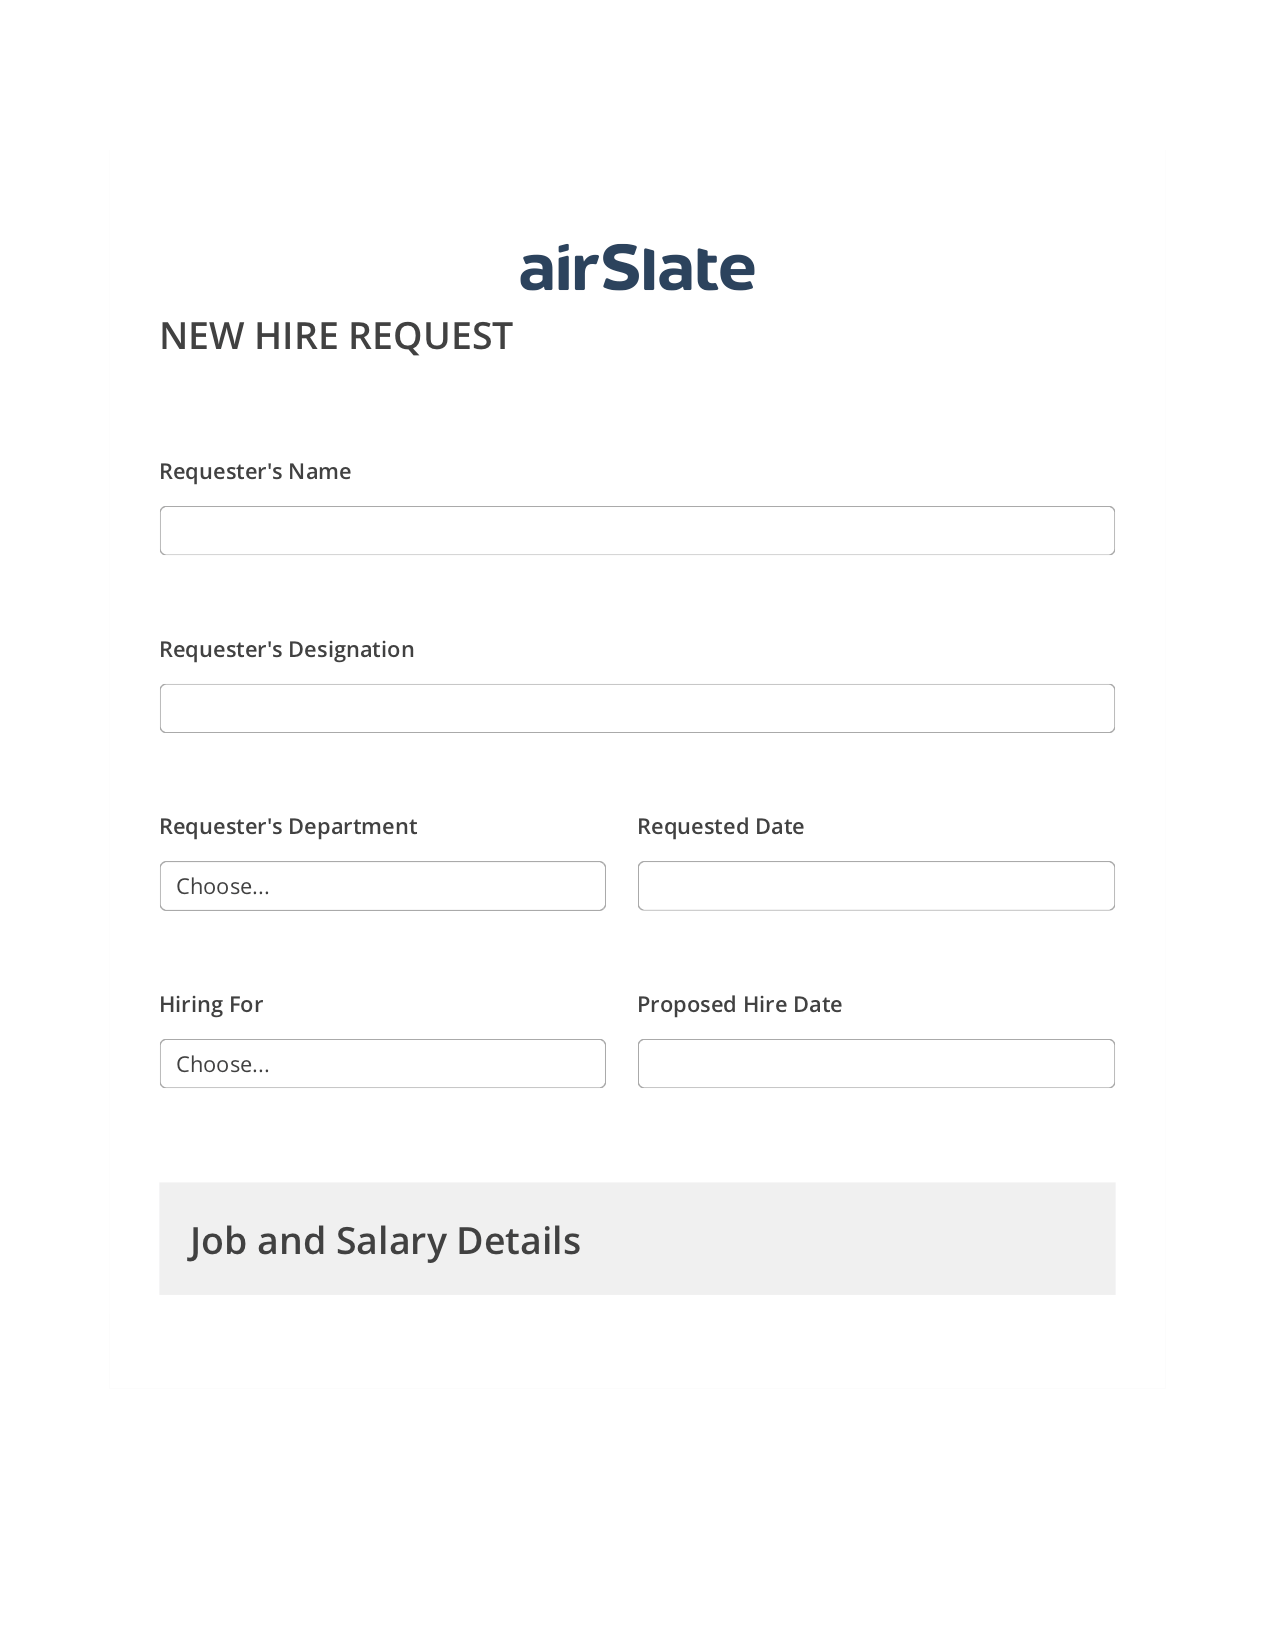 Hiring Request Workflow Pre-fill from Excel Spreadsheet Bot, Rename Slate Bot, Archive to OneDrive Bot